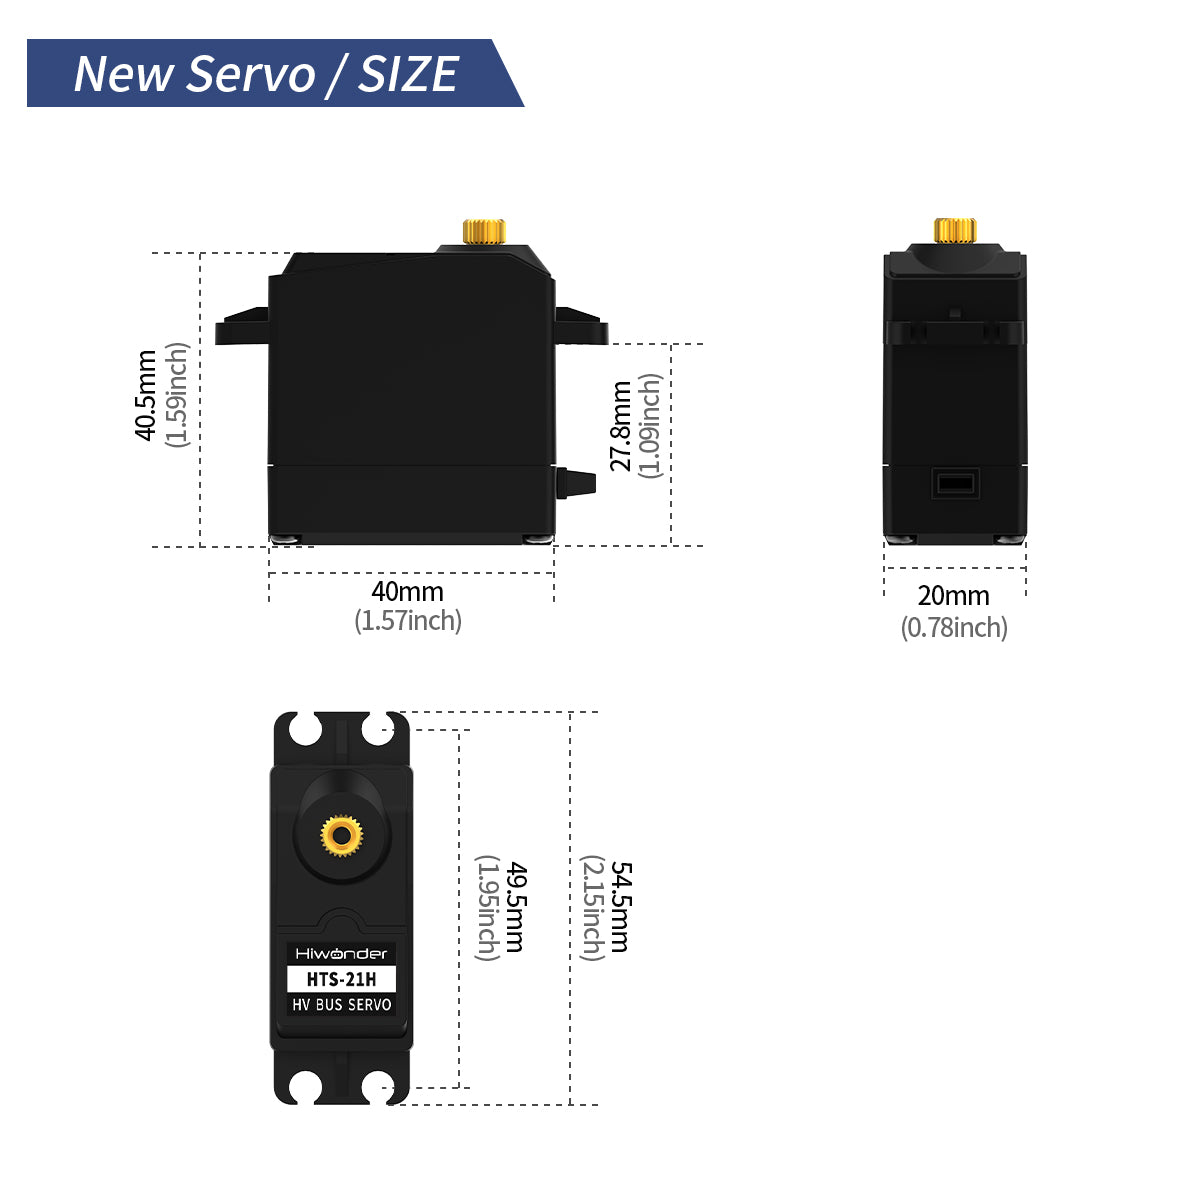 Serial High Voltage Bus Servo Anti-burning and Anti-blocking Intelligent Serial Port High Torque High Precision with Feedback Dedicated for Mechanical Claws